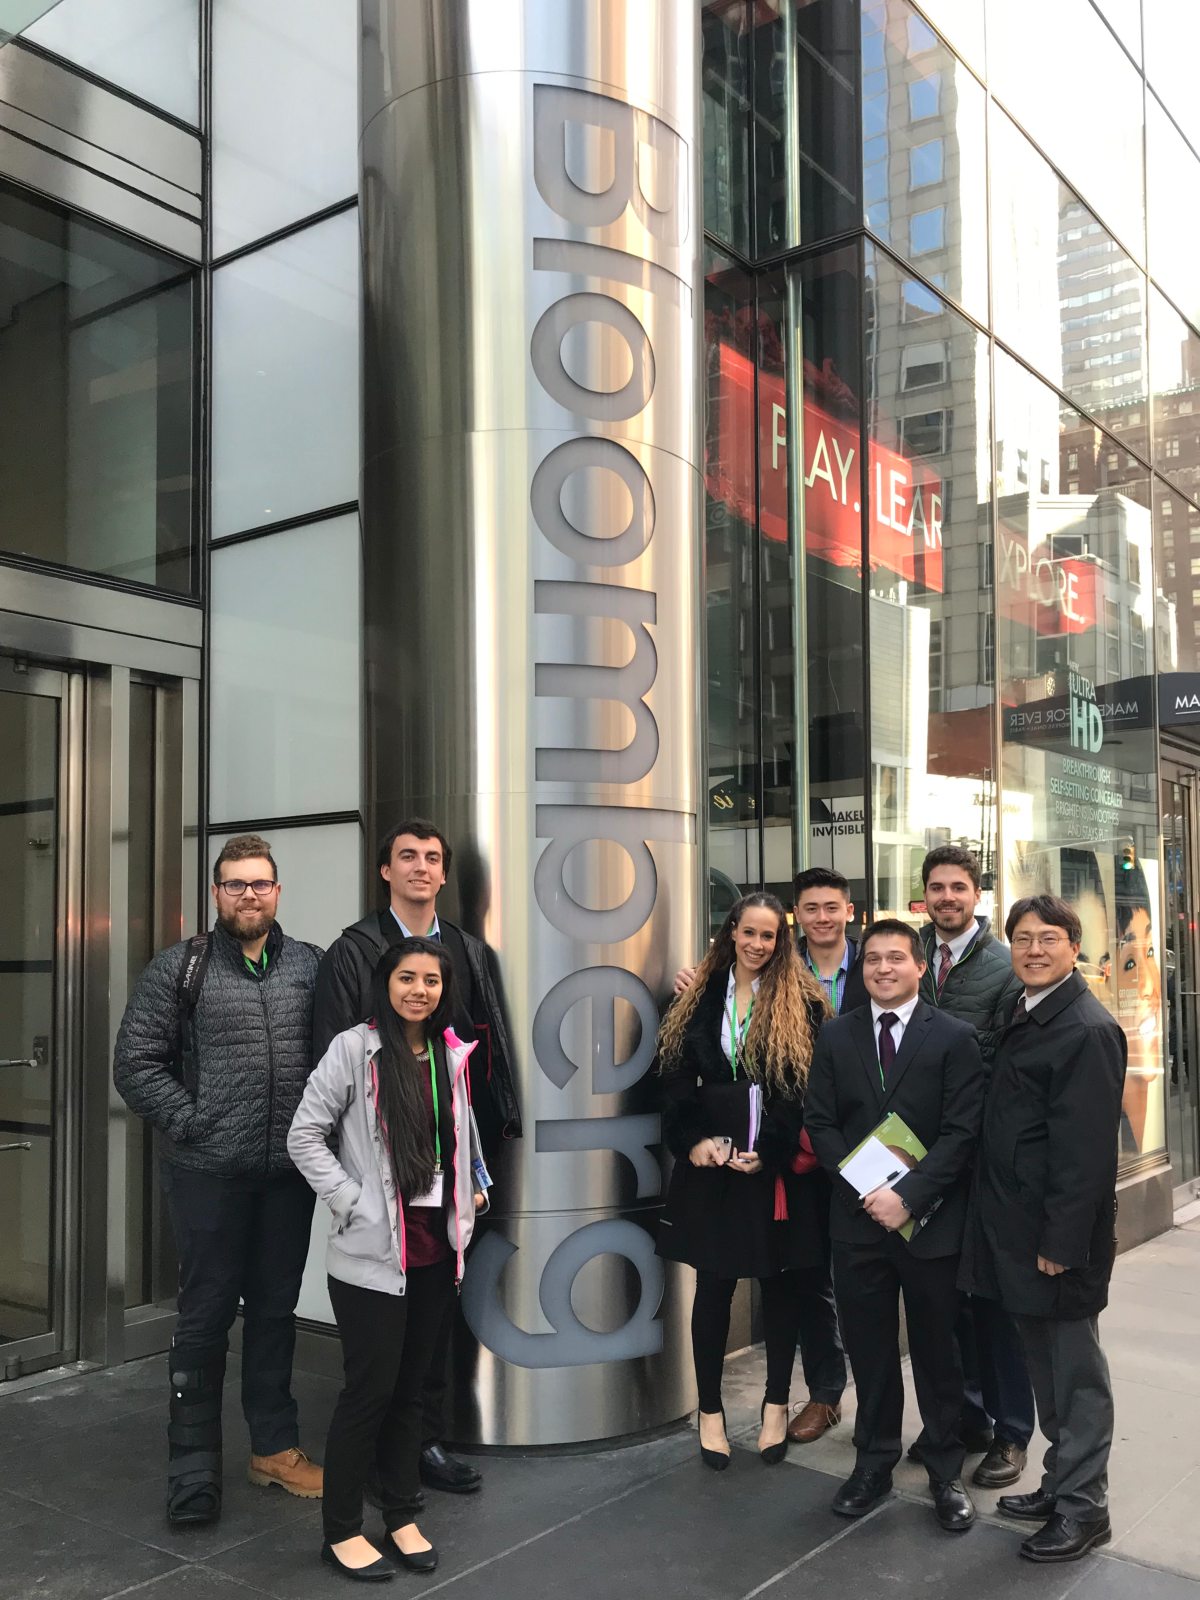 Davis Students pose outside Bloomberg in New York City.